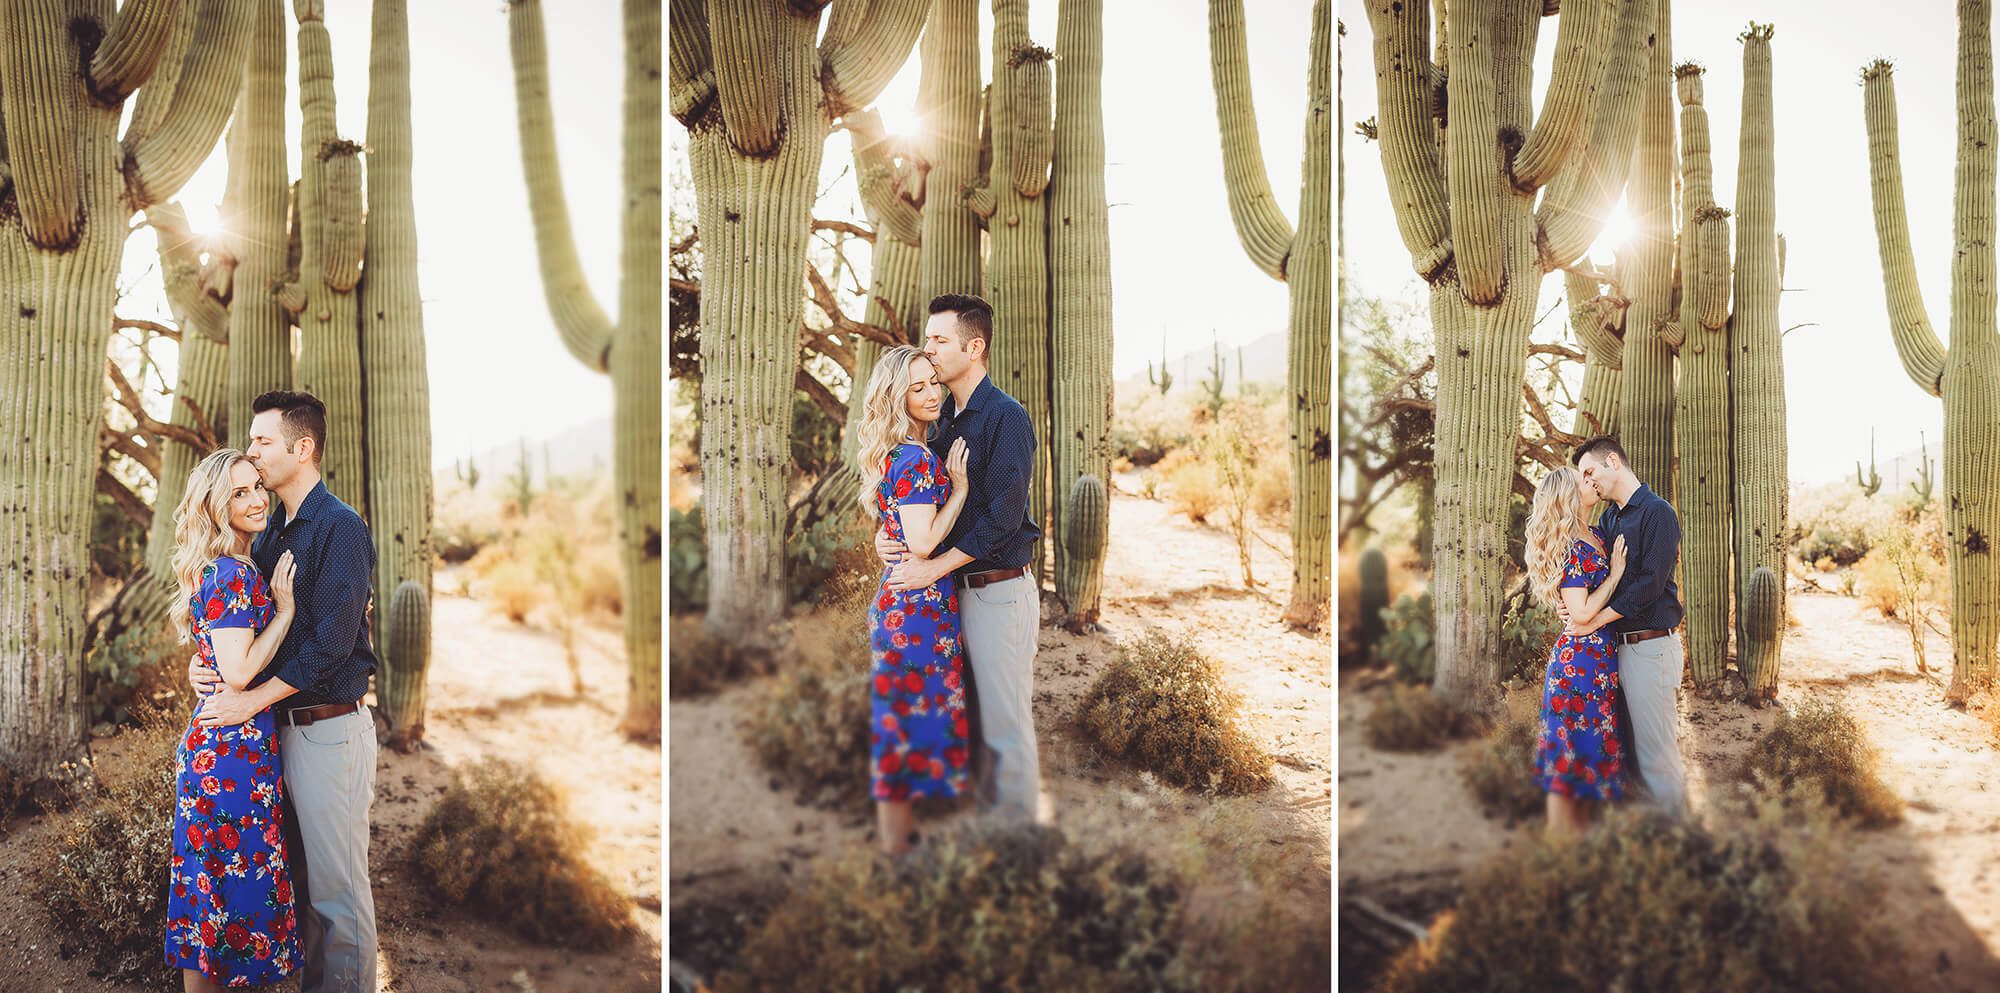 Shaun and Ally during their sunset desert engagement session at Sabino Canyon with Belle Vie Photography